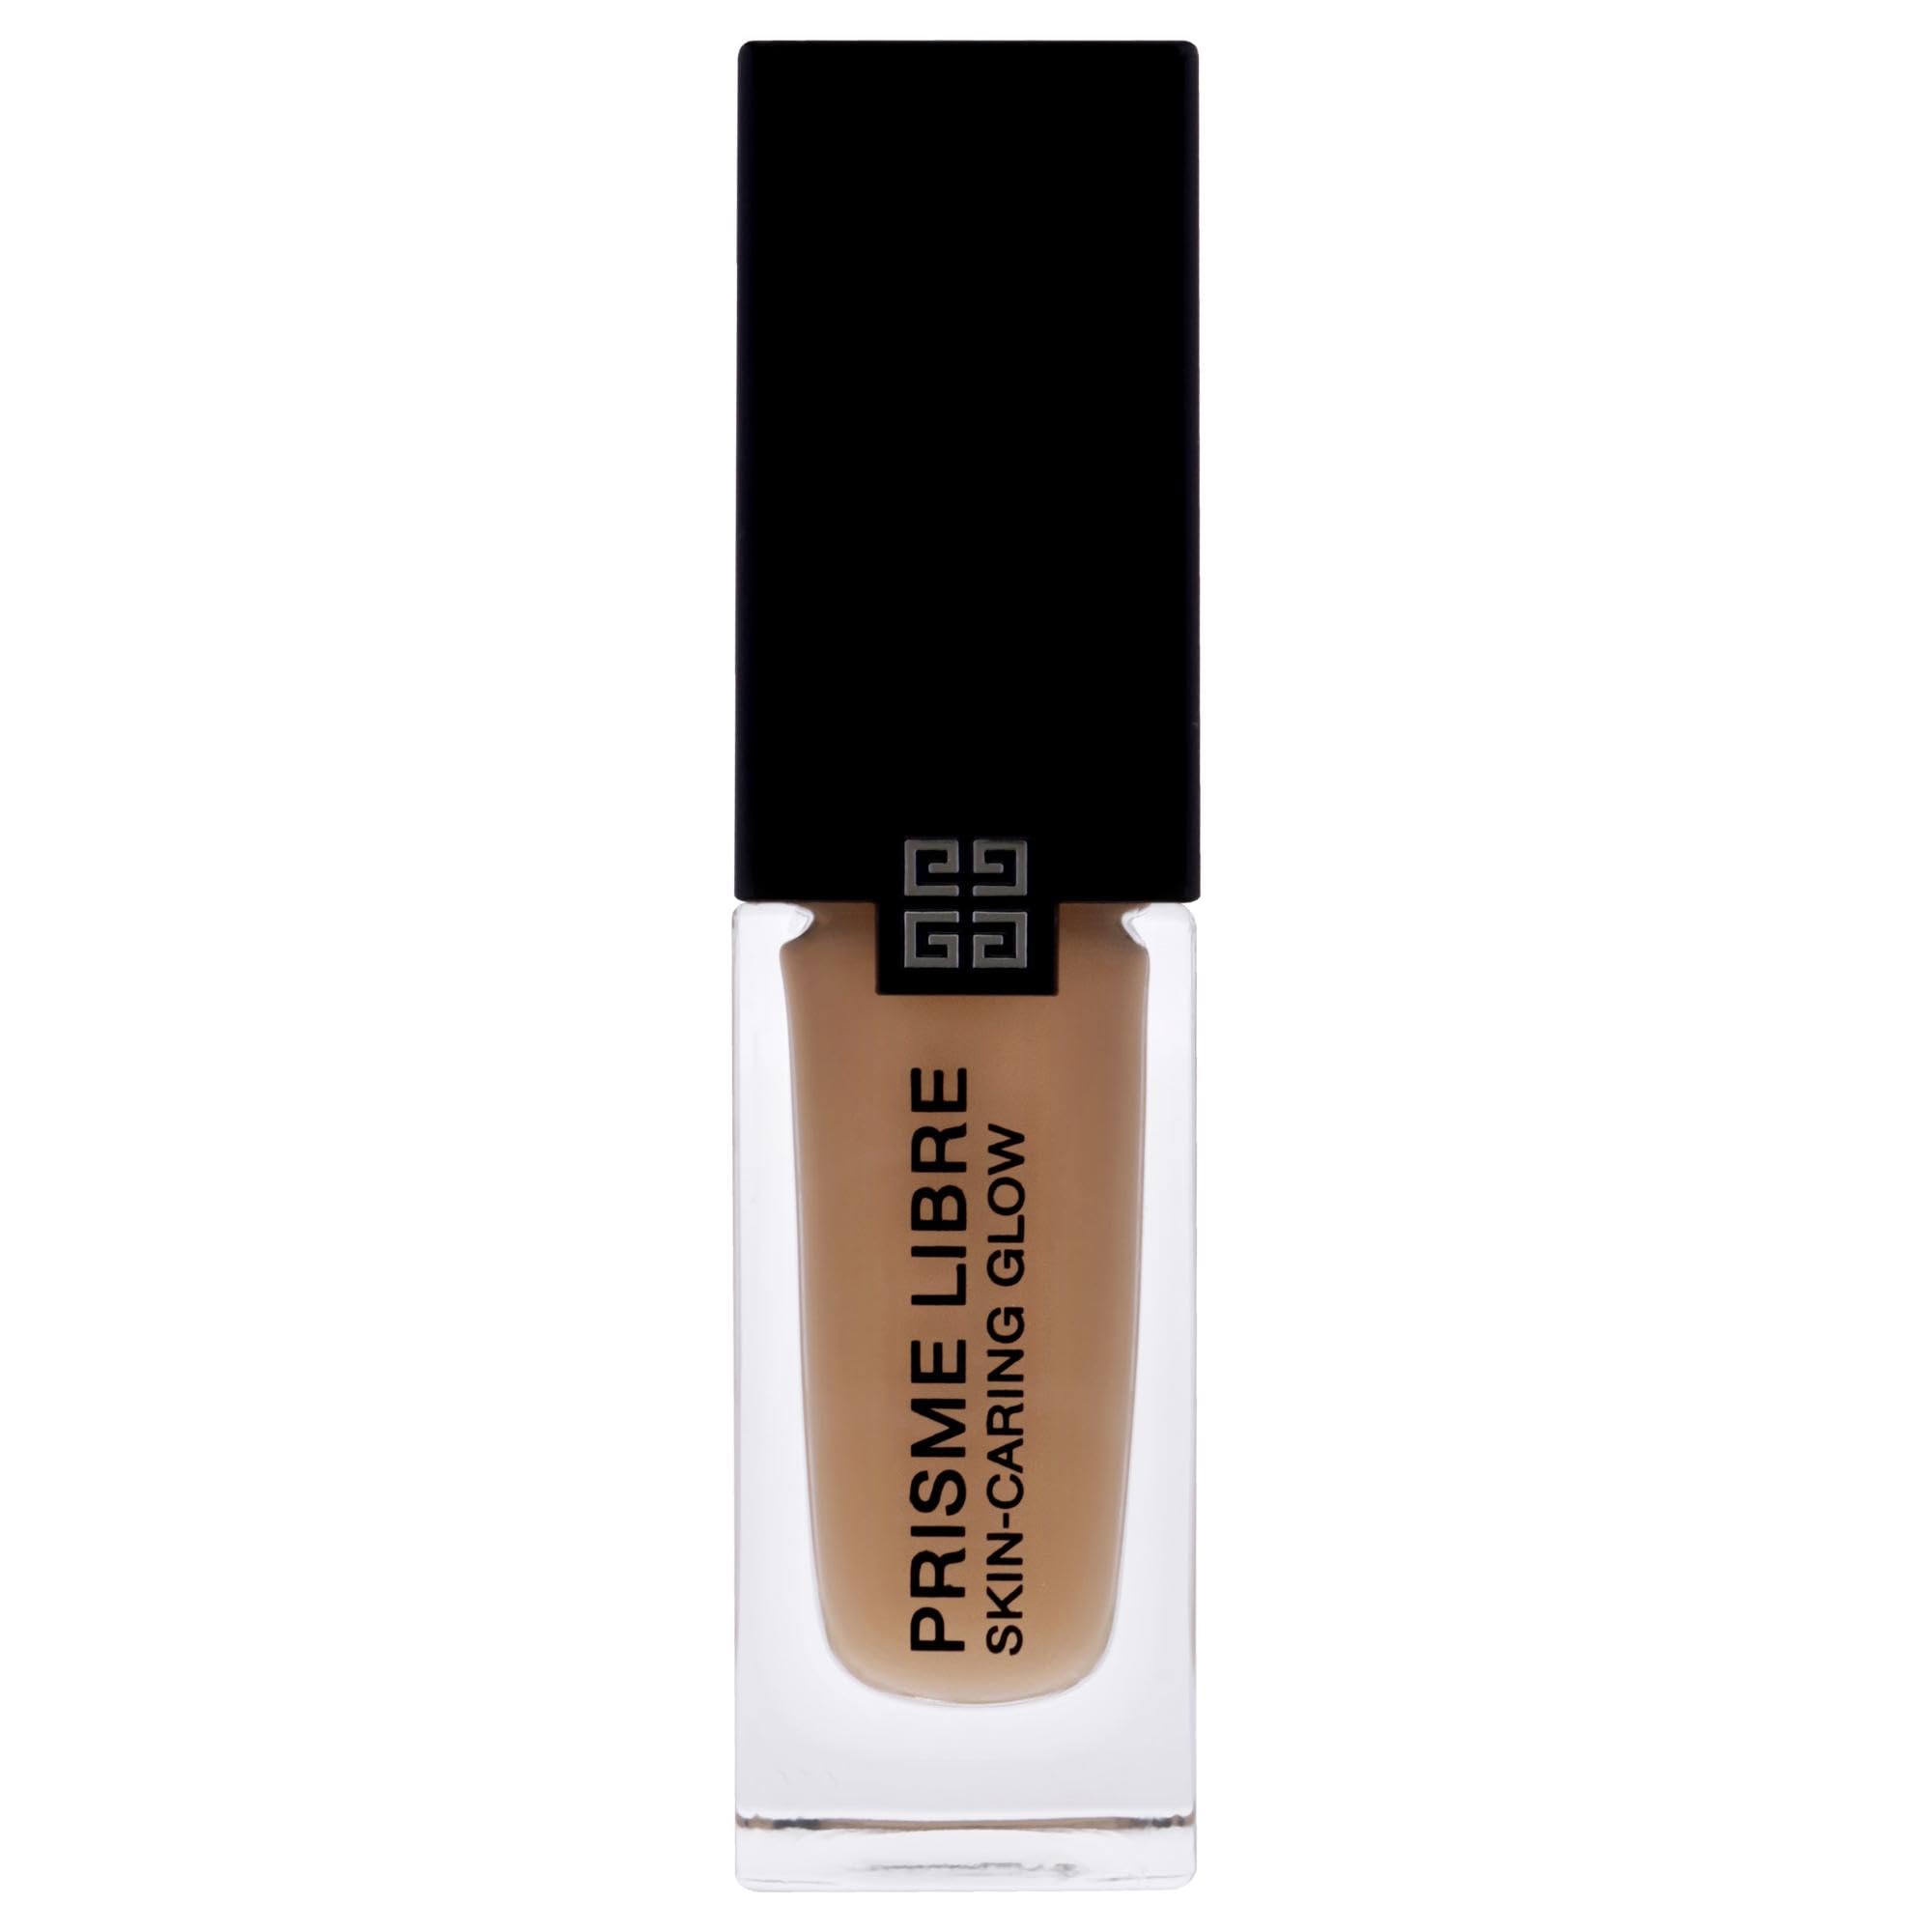 Prisme Libre Skin-Caring Glow Foundation - 4-W280 by Givenchy for Women - 1 oz Foundation